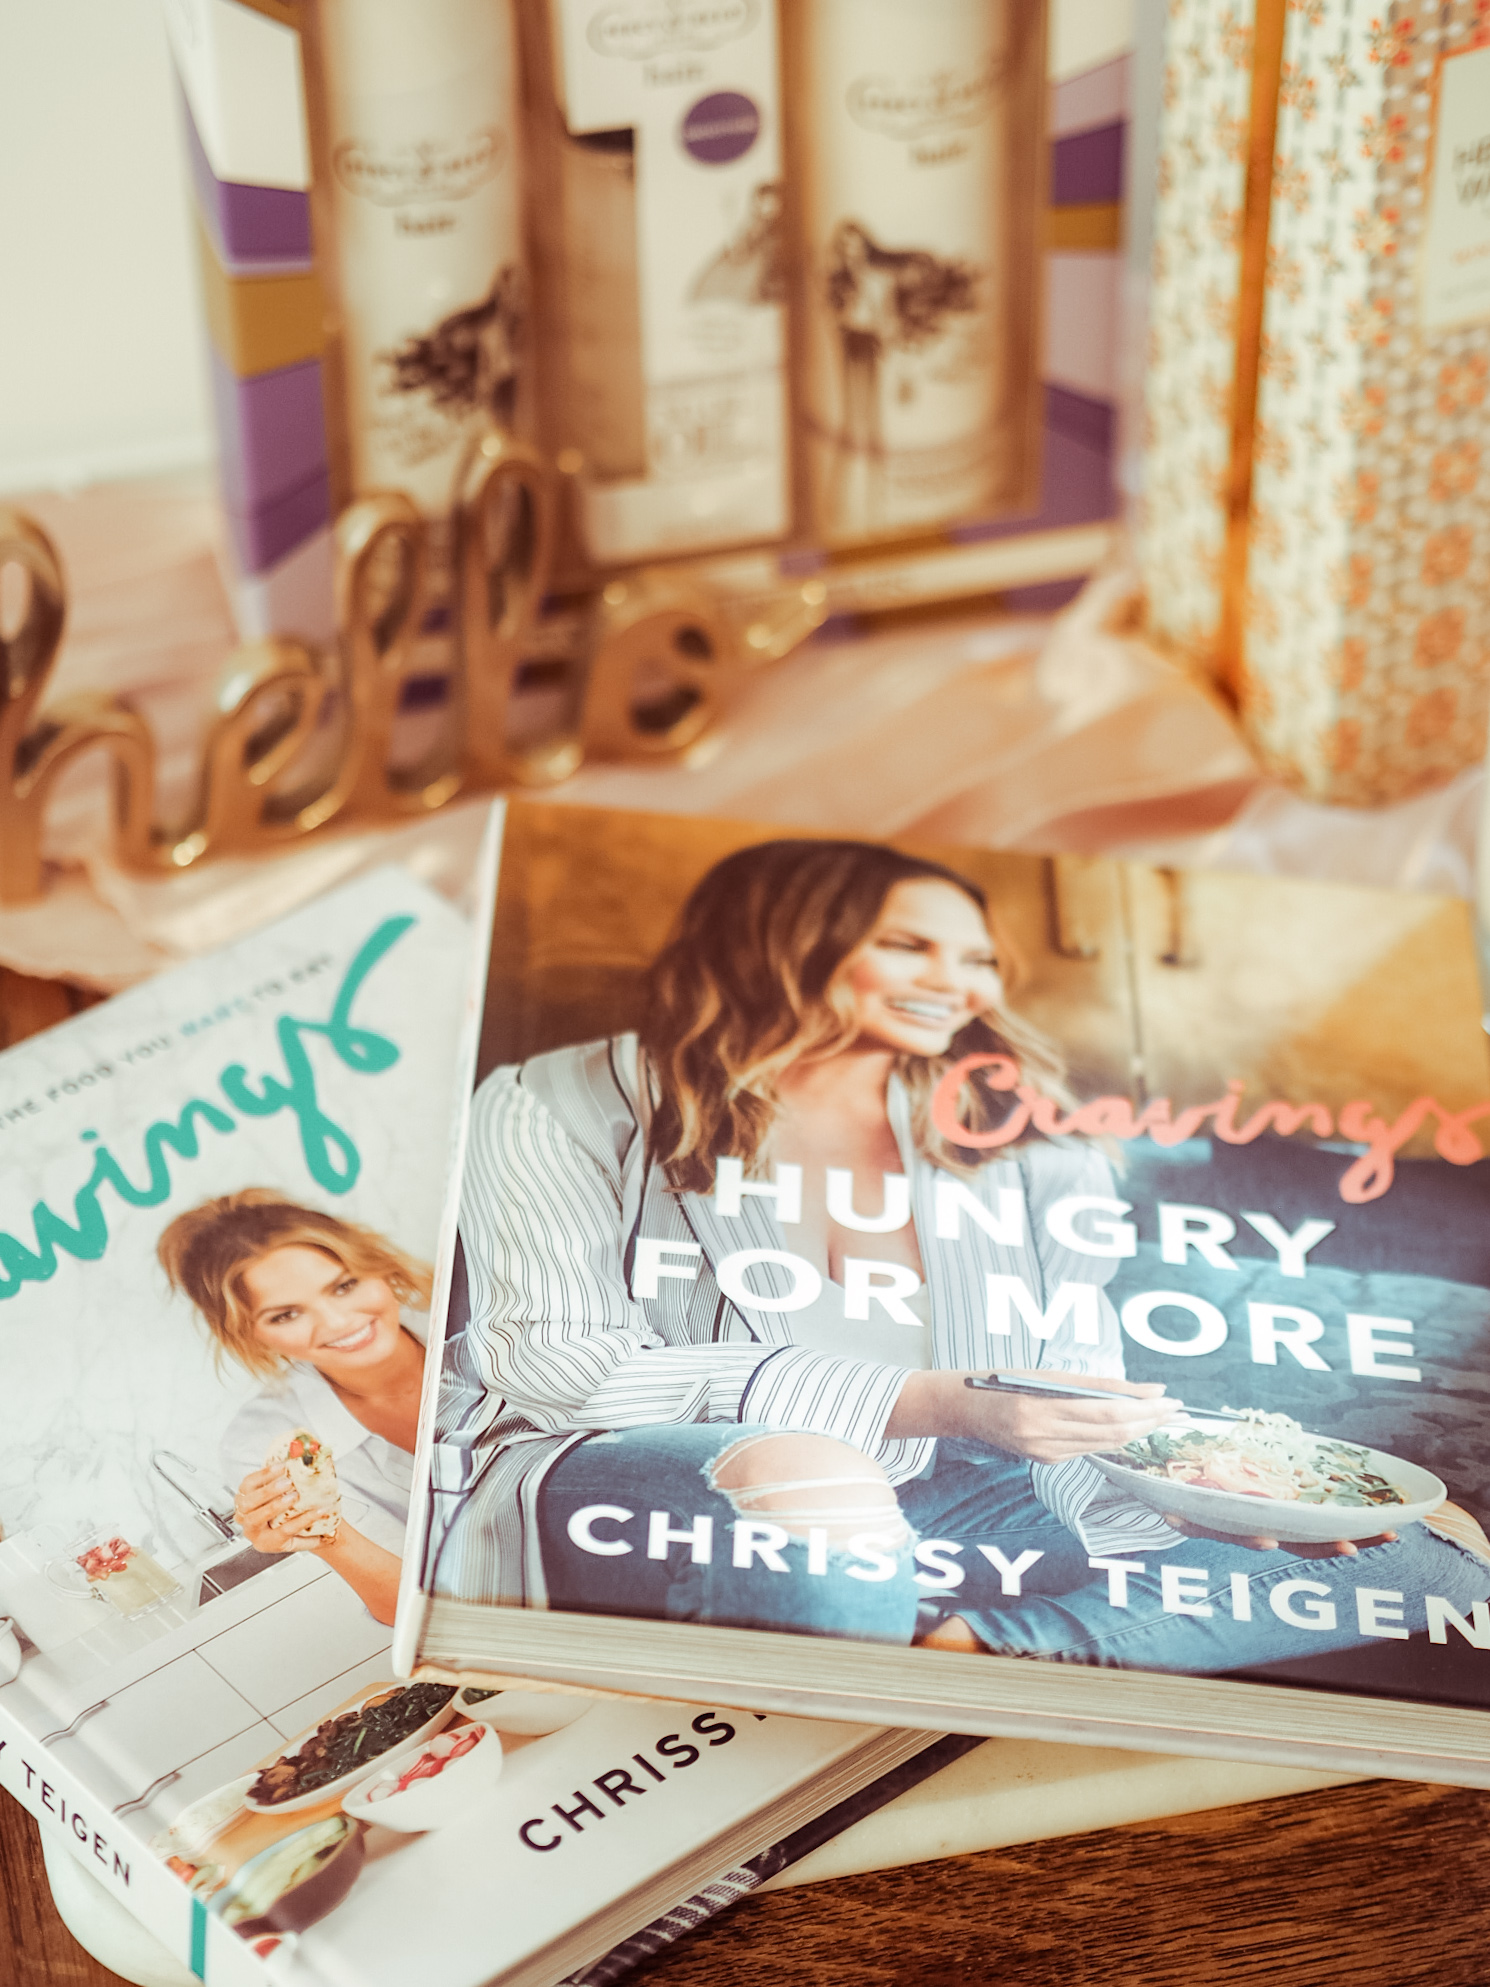 Chrissy Teigen Cravings and Hungry for more books - LemonaidLies